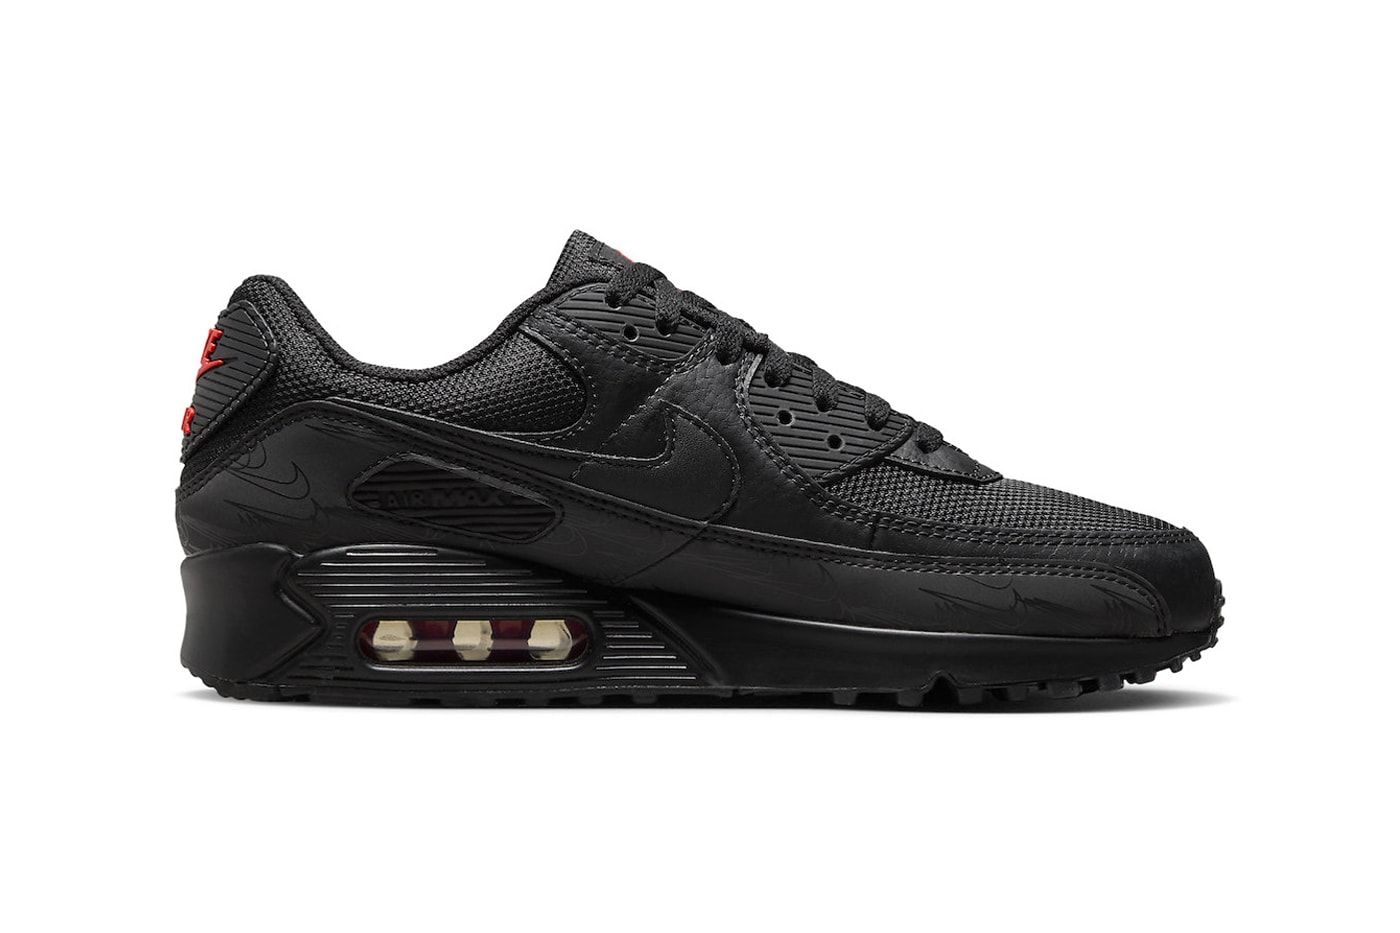 Nike Air Max 90 "Black Reflective" Has Arrived DZ4504-003 release info swoosh stealthy all black sneaker